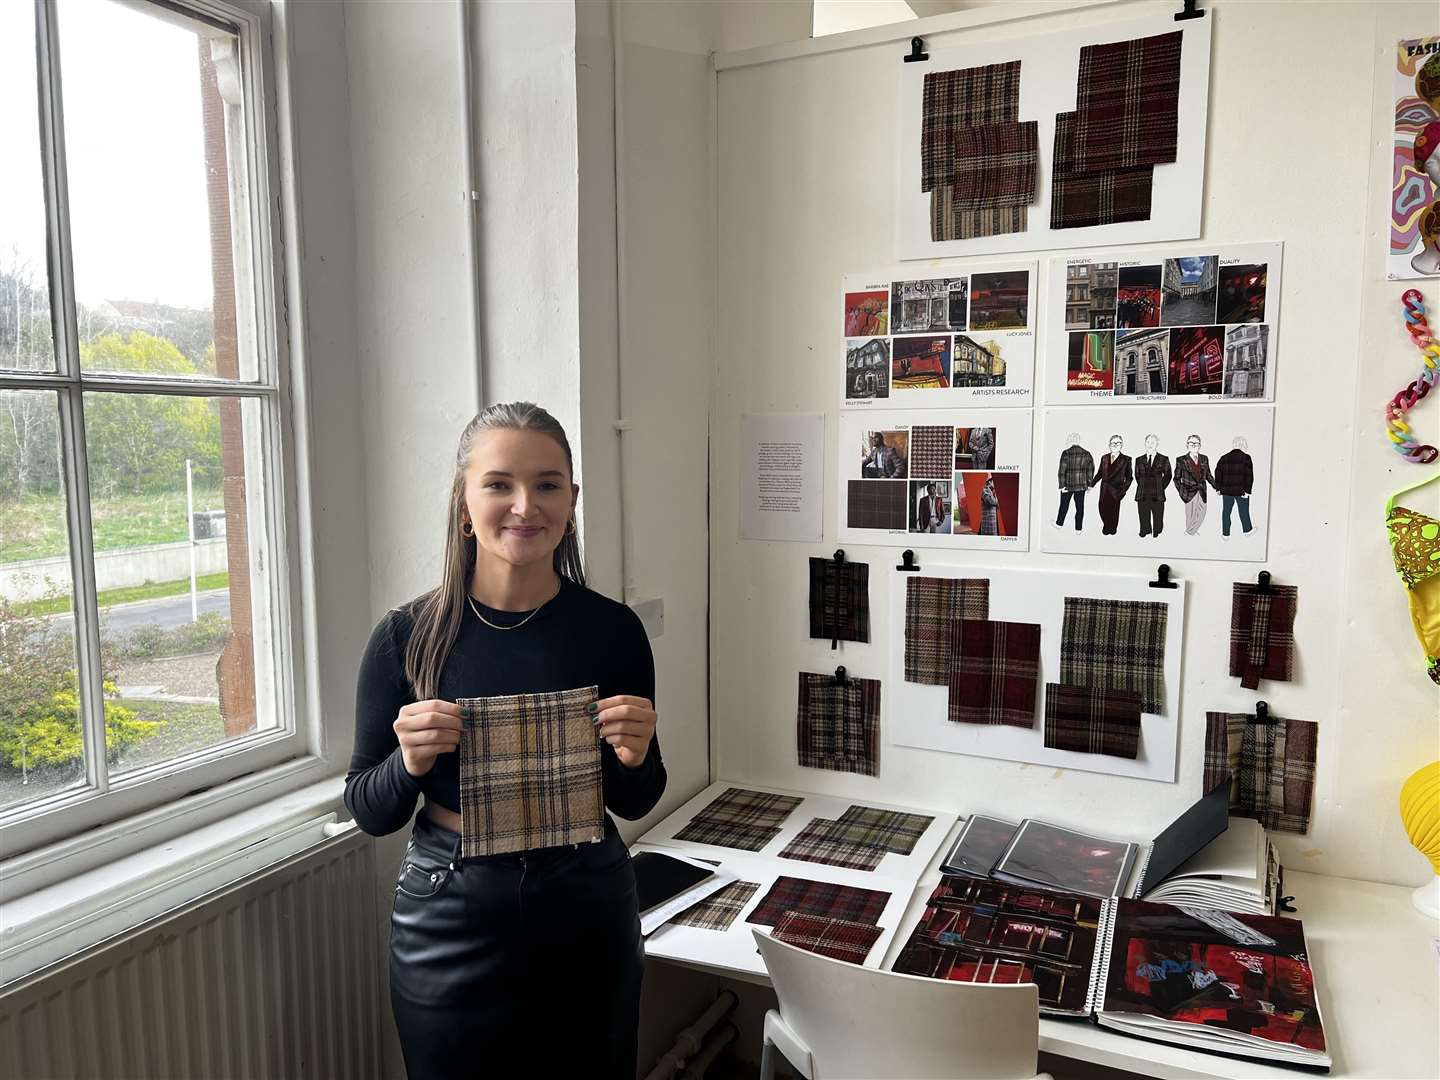 Heading for Savile Row – Lois Cowie with her award-winning textile design.